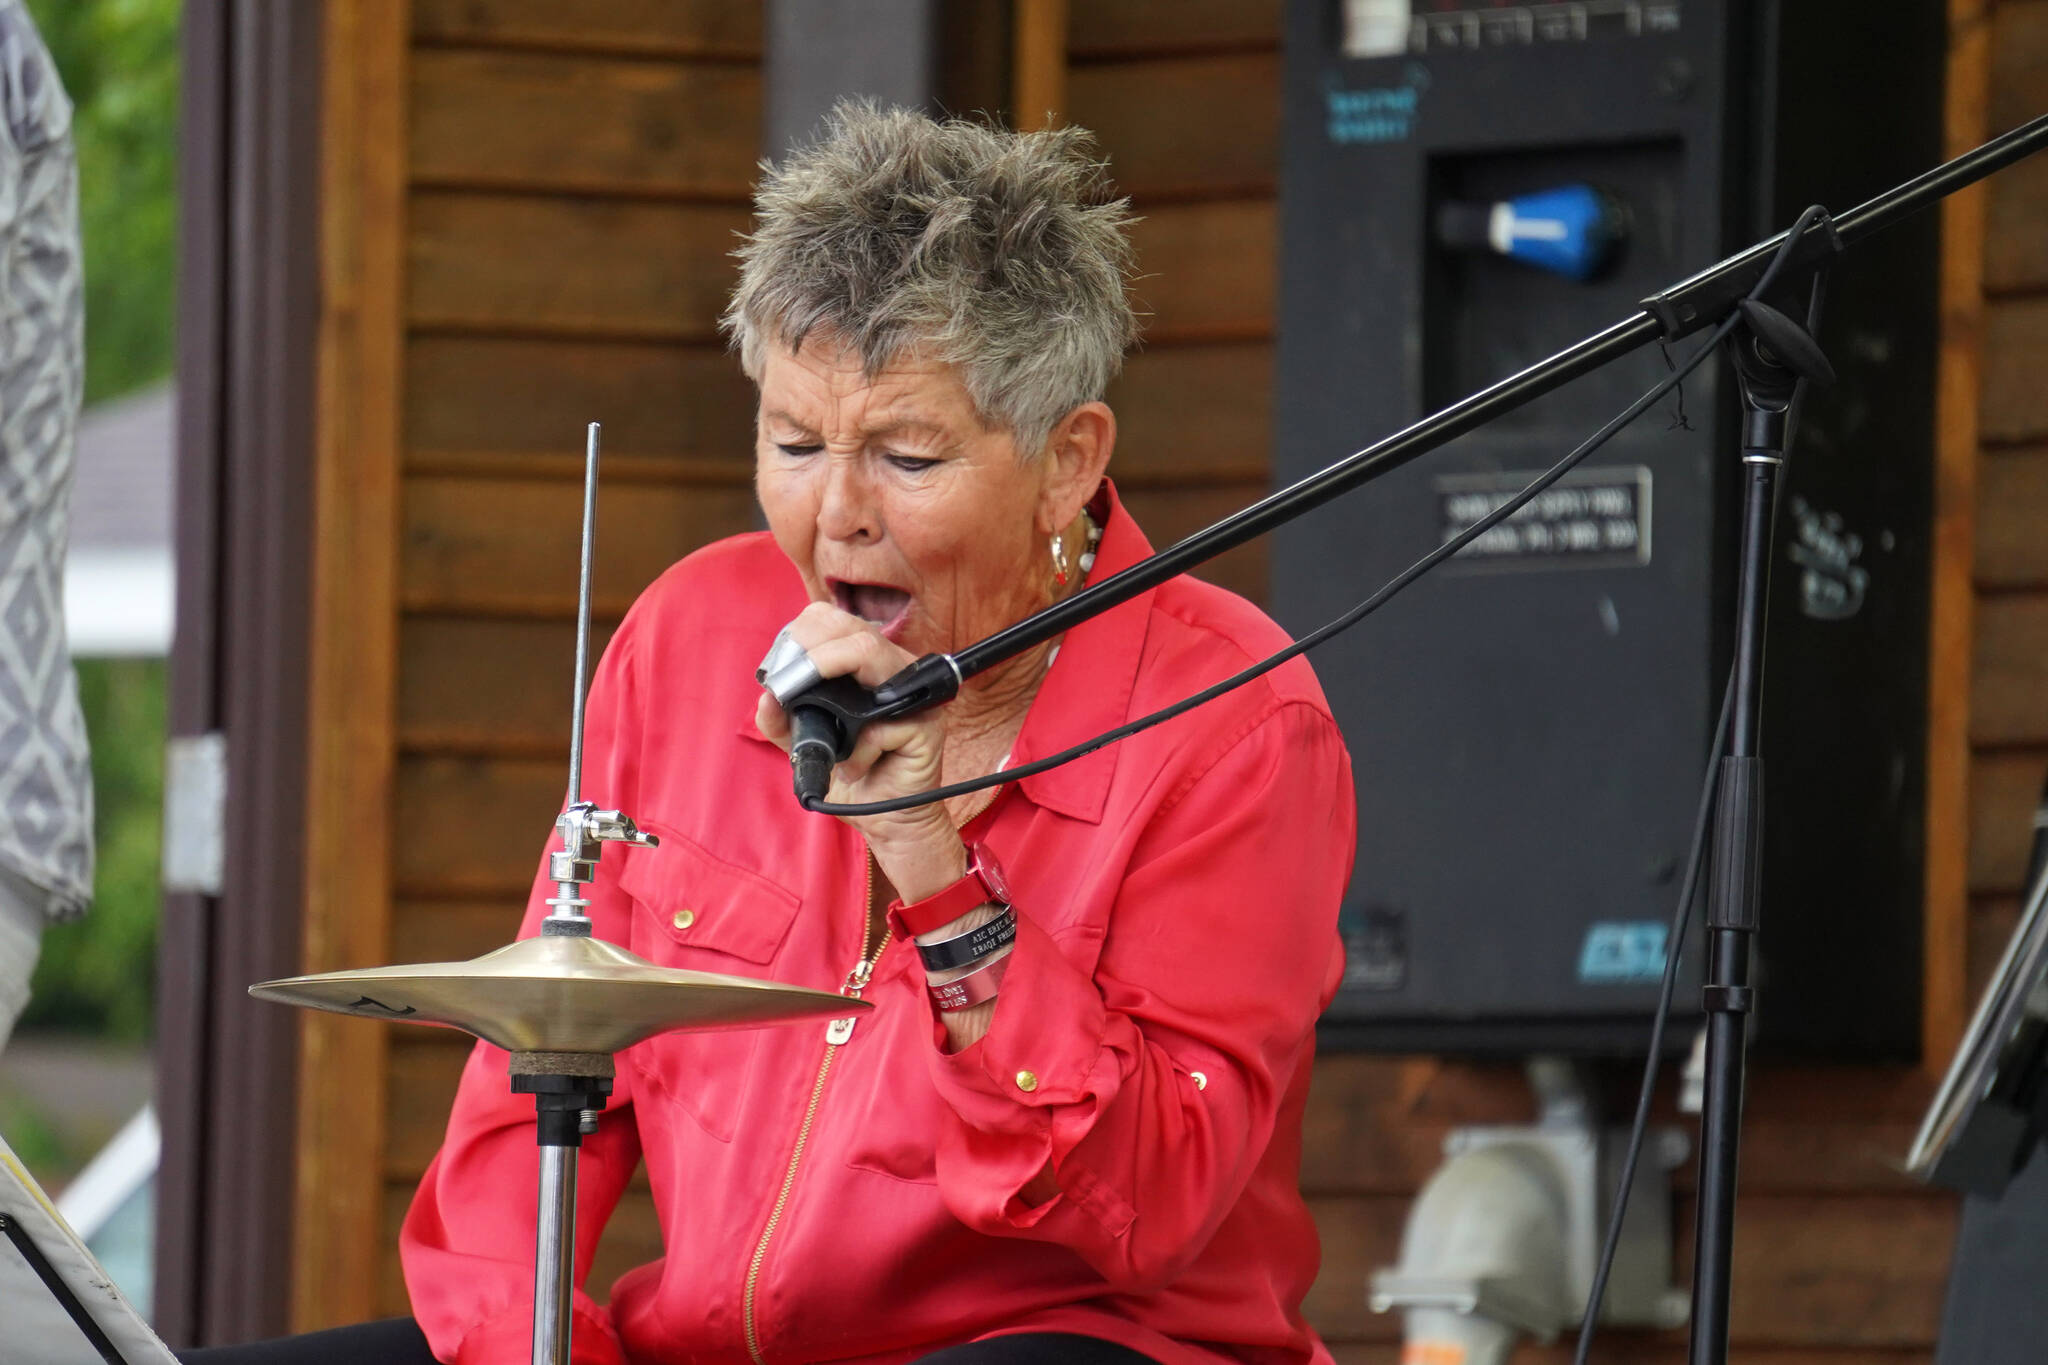 Connie Brannock, part of Connie Brannock’s Tiny House of Funk, performs during the Soldotna Music Series at Soldotna Creek Park in Soldotna, Alaska, on Wednesday, June 21, 2023. (Jake Dye/Peninsula Clarion)